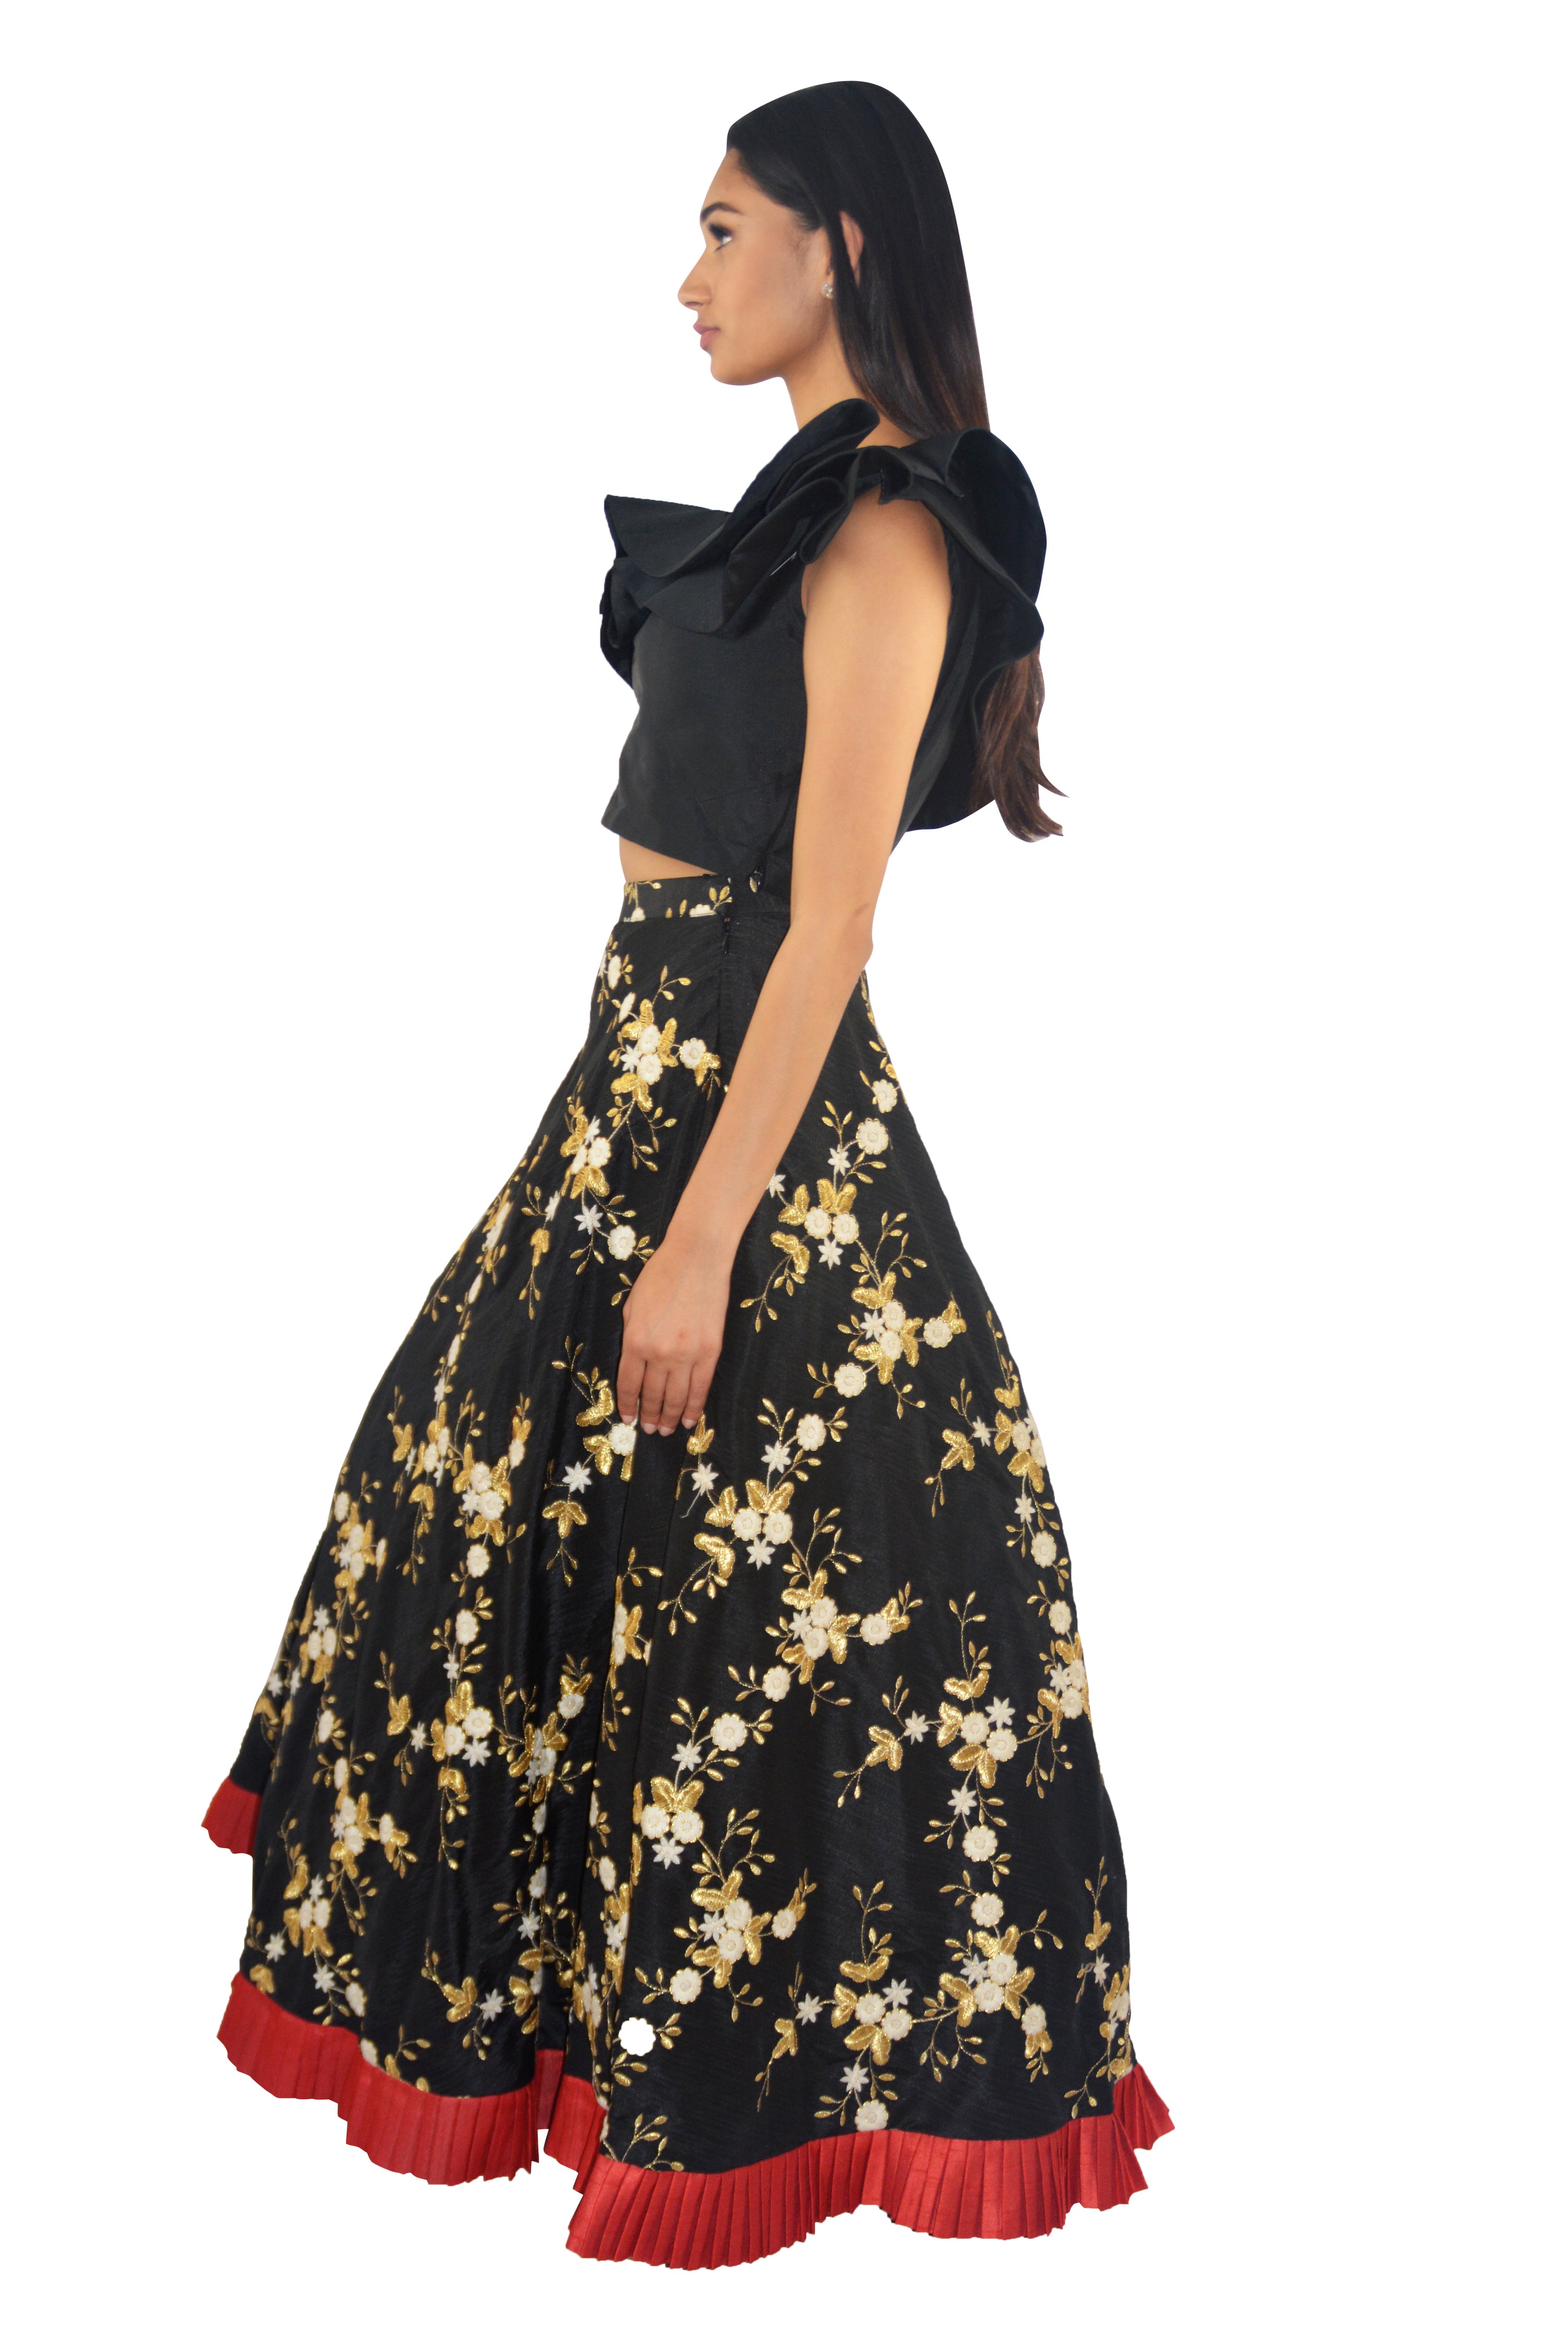 Eros Lengha - One shoulder crop top with black embroidered Lengha - bAnuDesigns